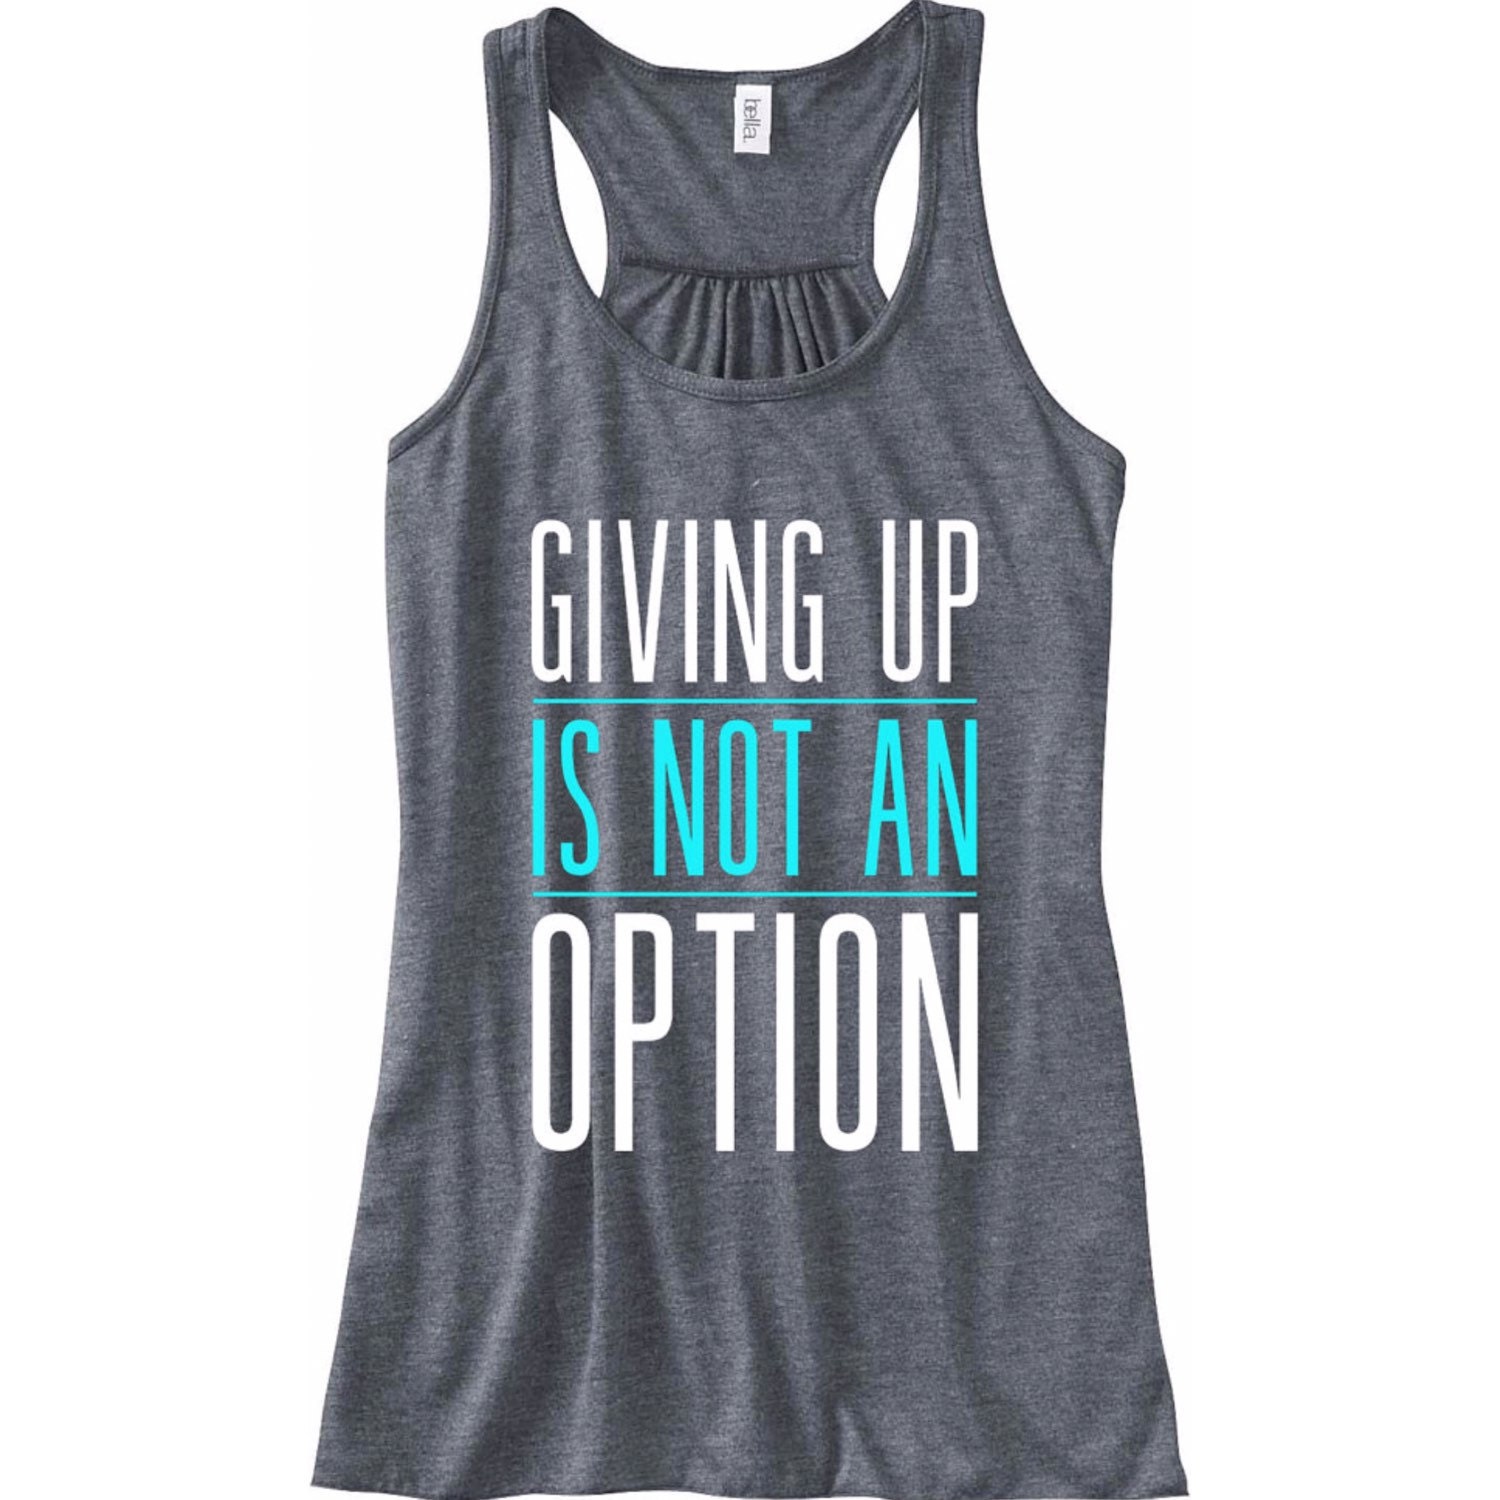 Workout Tank Giving Up Is Not An Option Train by sunsetsigndesigns